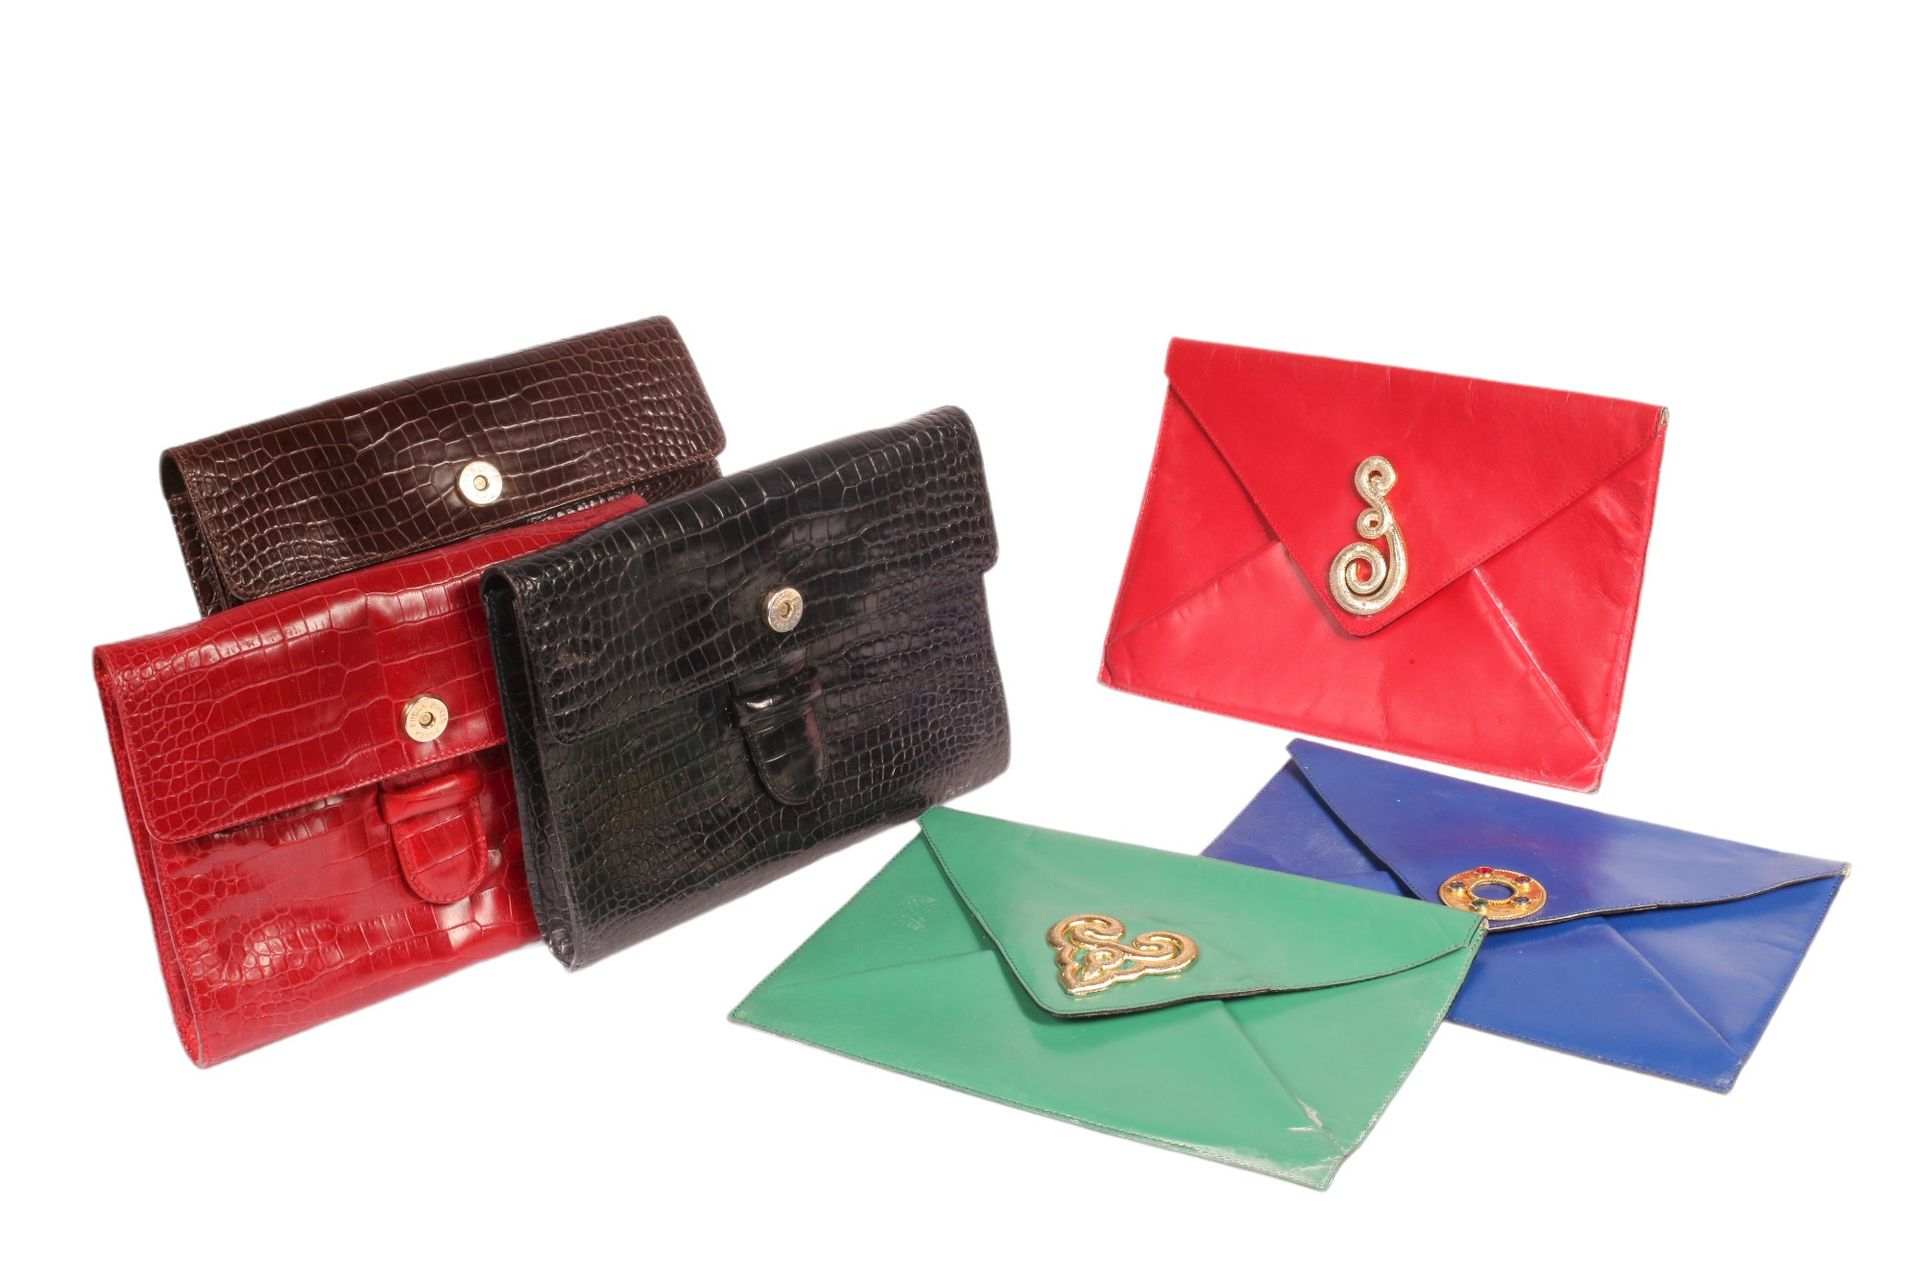 Null * Set of 6 leather pouches

3 pouches LA BAGAGERIE by JEAN MARLAIX

3 pocke&hellip;